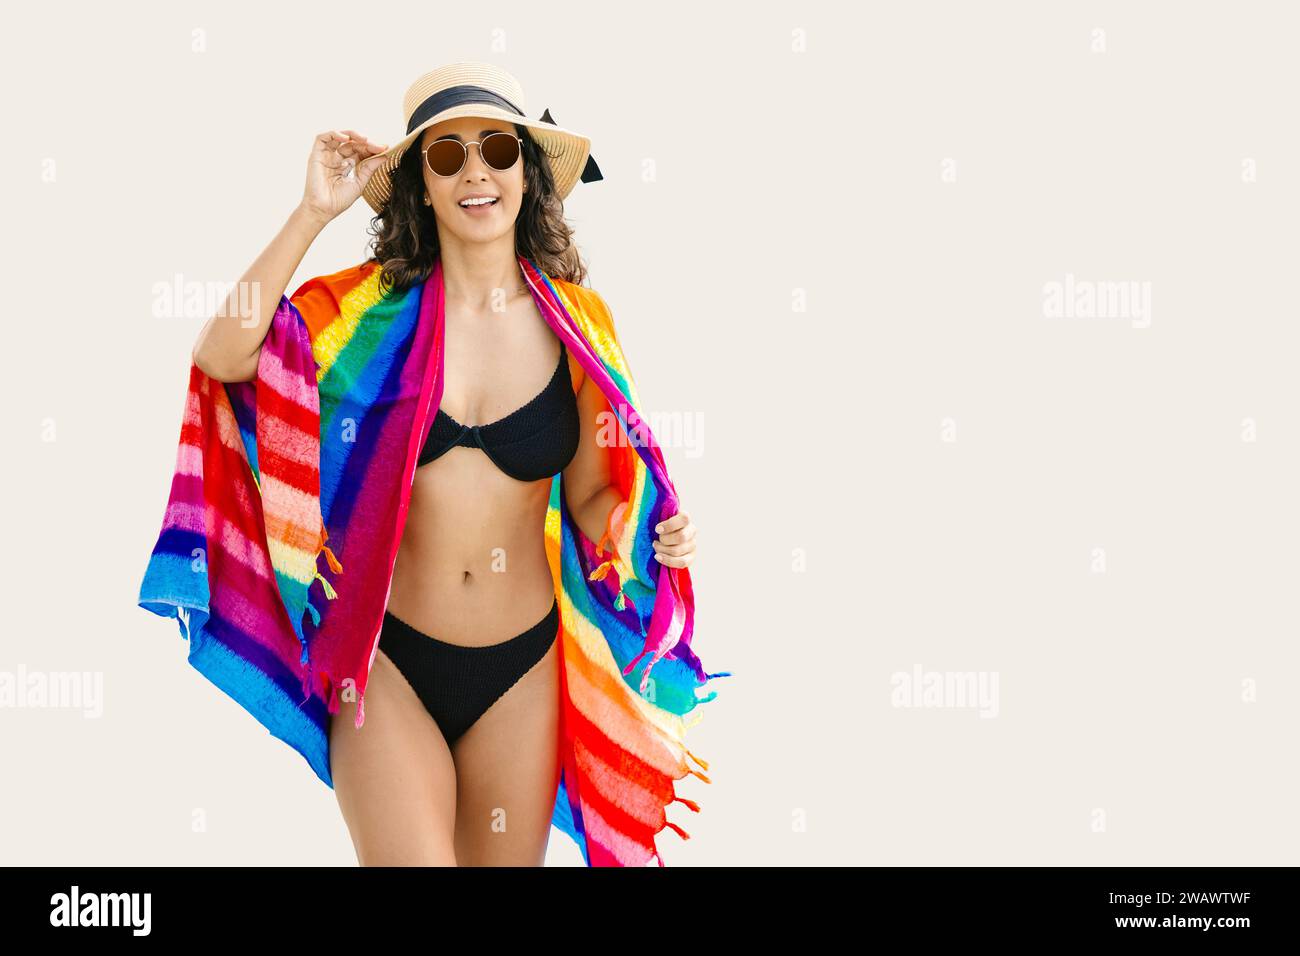 portrait happy bikini fashion beauty women standing smile with colorful shawls sunglasses and hat enjoy relax holiday summer time isolated Stock Photo